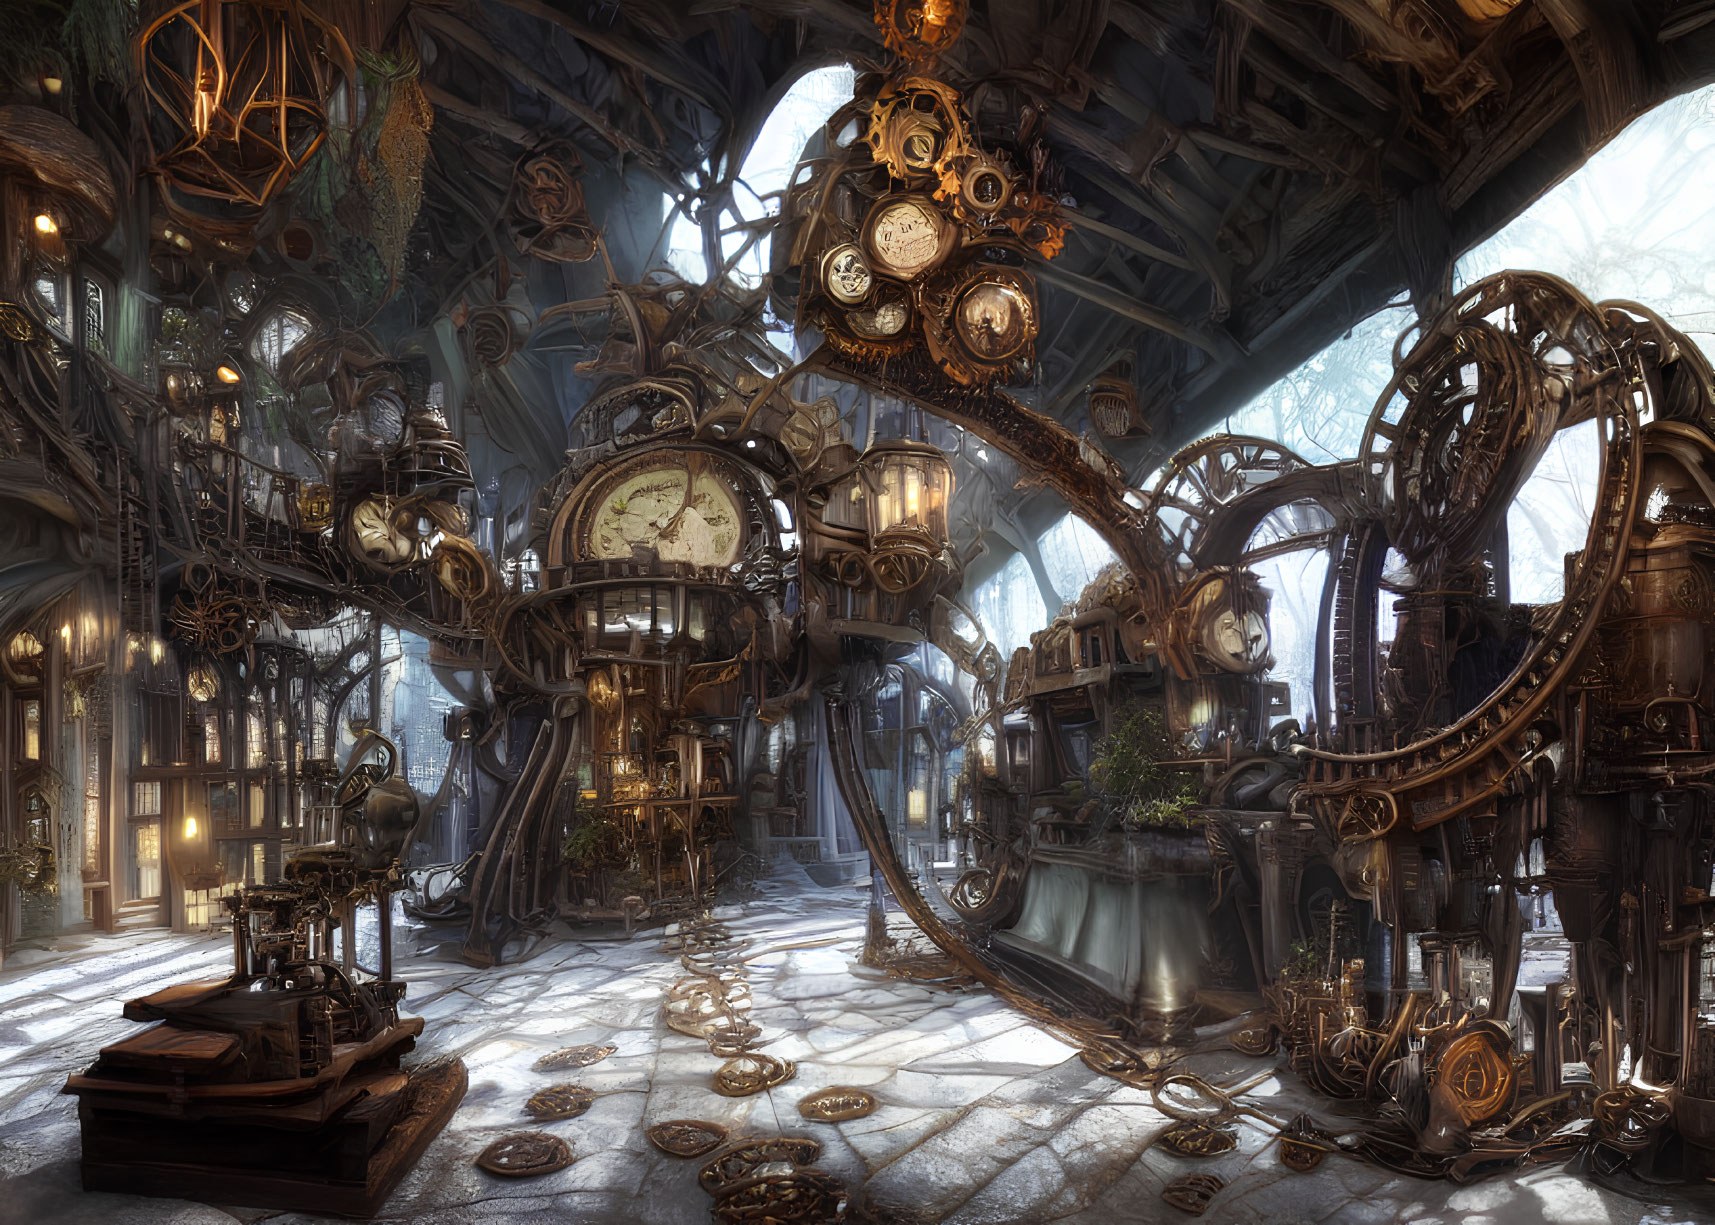 Steampunk interior with brass gears, clocks, and mechanical devices under a vaulted ceiling